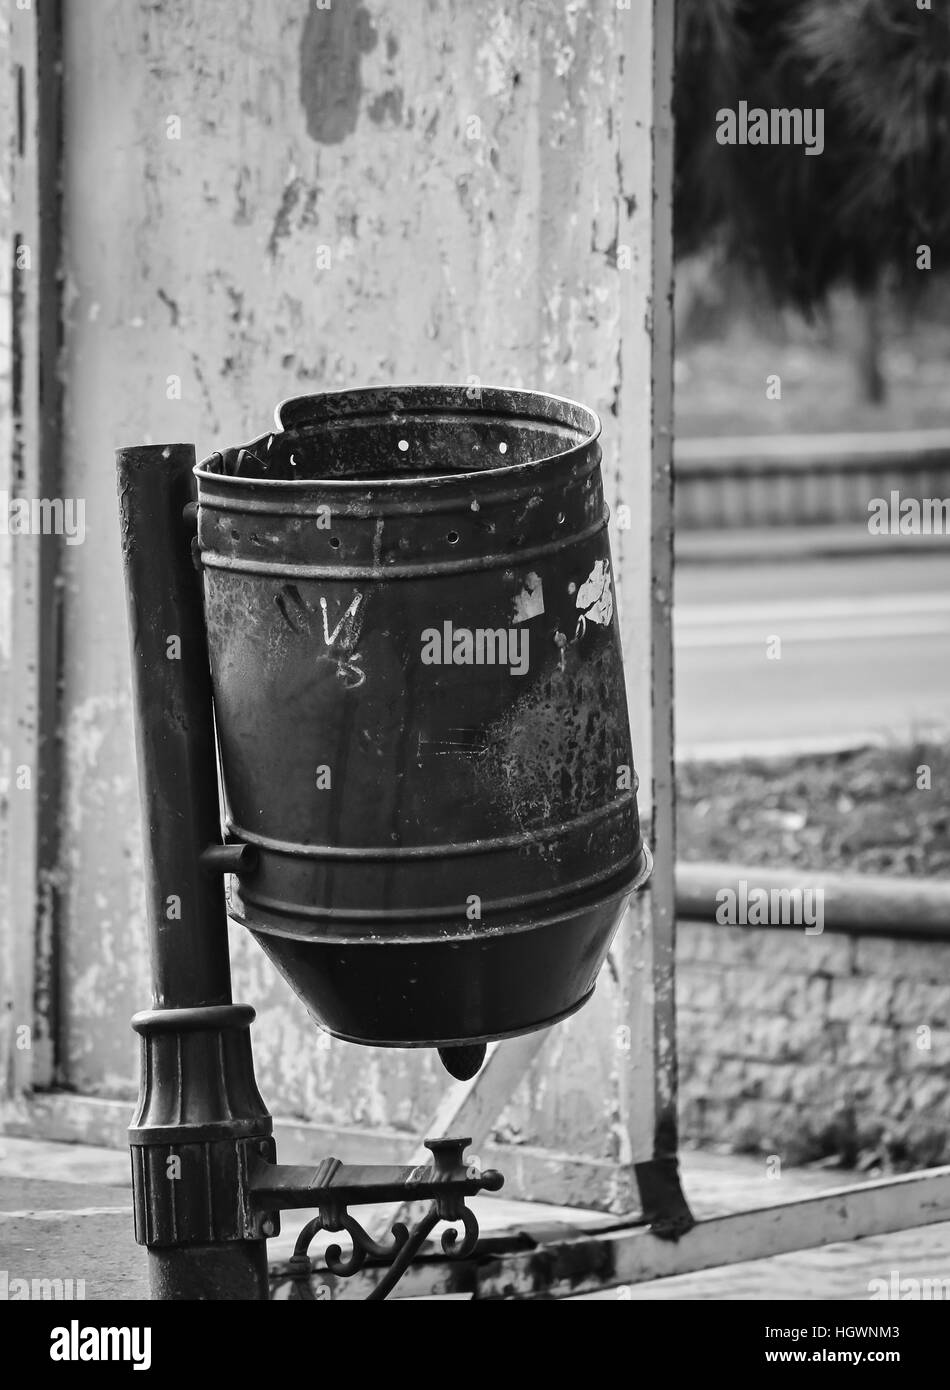 Metal trash can on the street in black and white colors Stock Photo